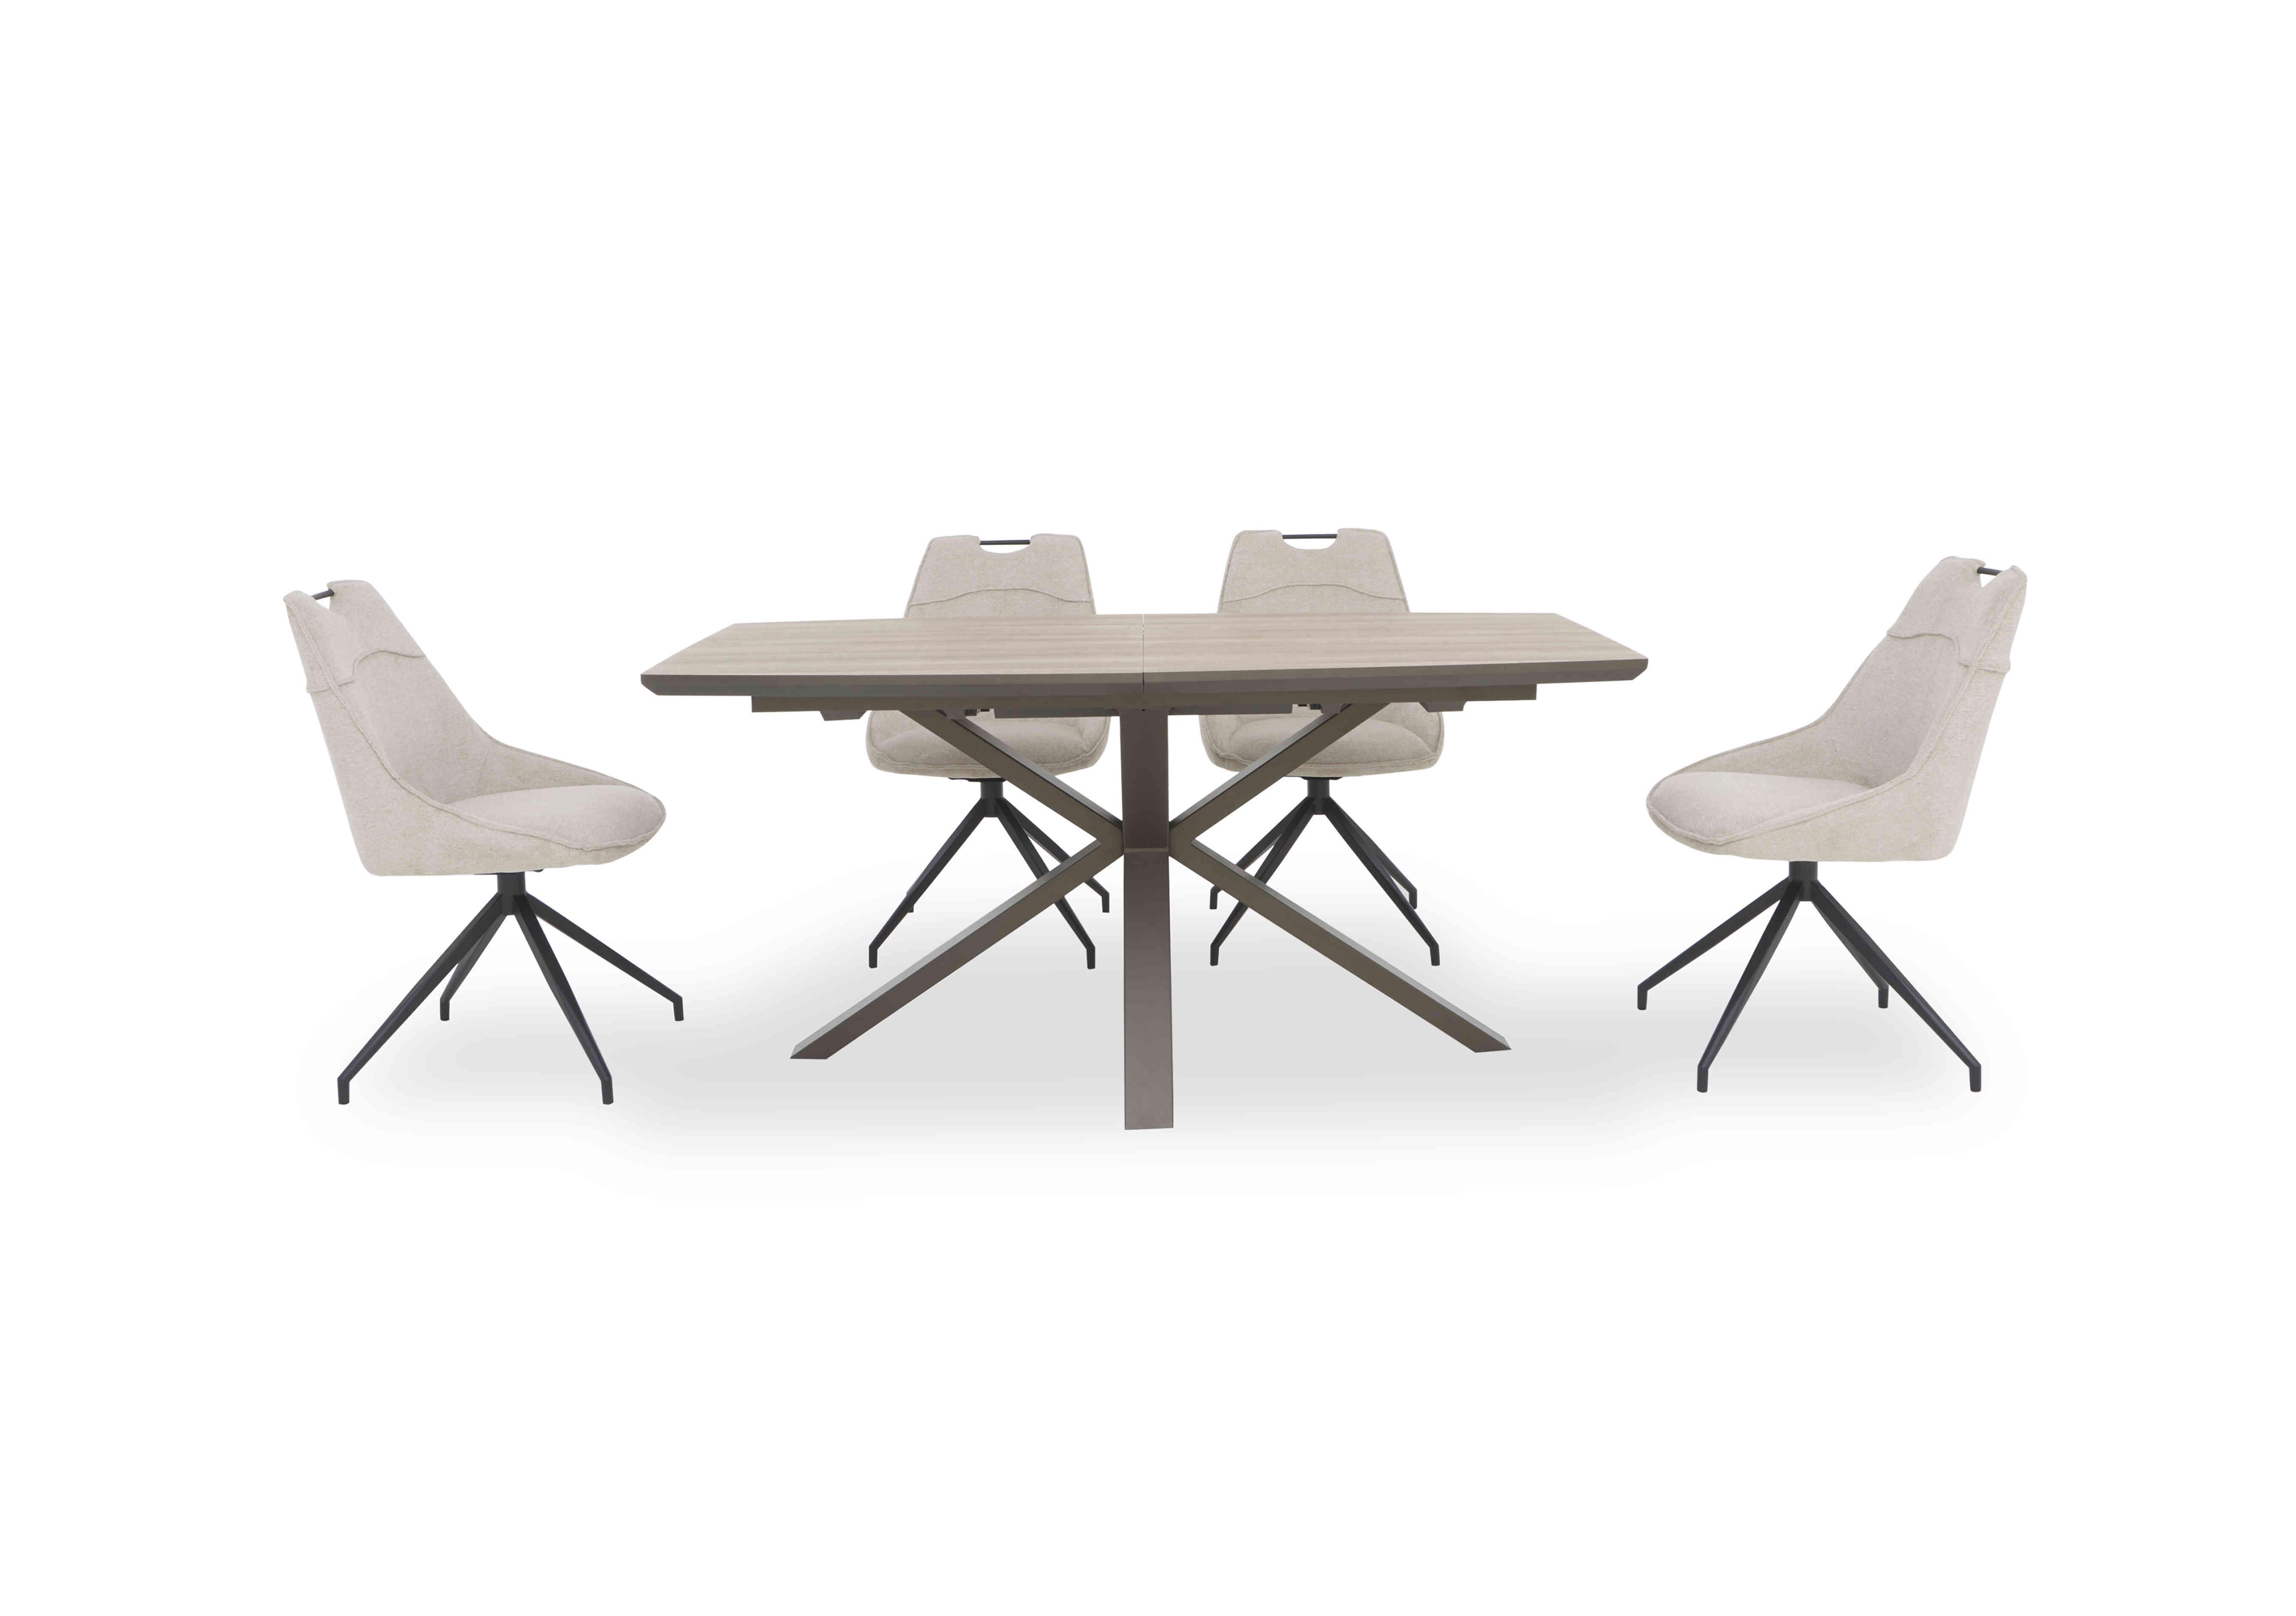 Pedro Extending Dining Table with 4 Swivel Fabric Dining Chairs in Natural on Furniture Village